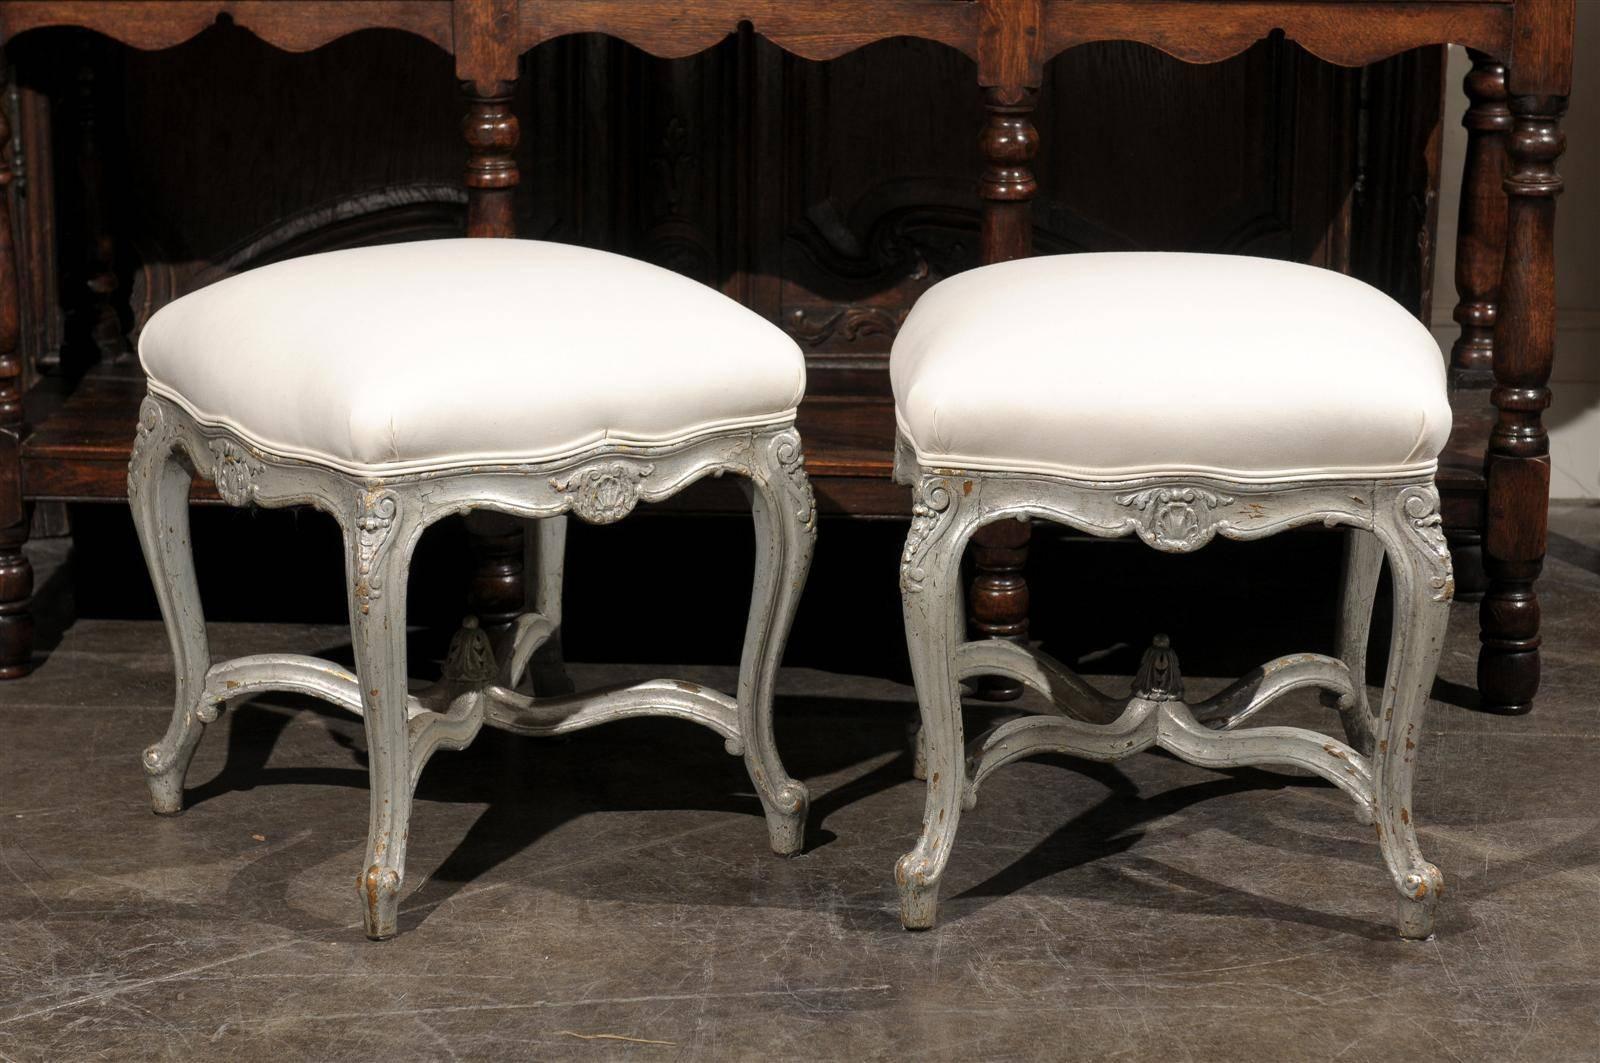 This pair of French Louis XV style silver leaf upholstered stools from the early 20th century features muslin covered seats over nicely scalloped skirts with central carved motifs. This exquisite pair of French Louis XV style stools, dating from the